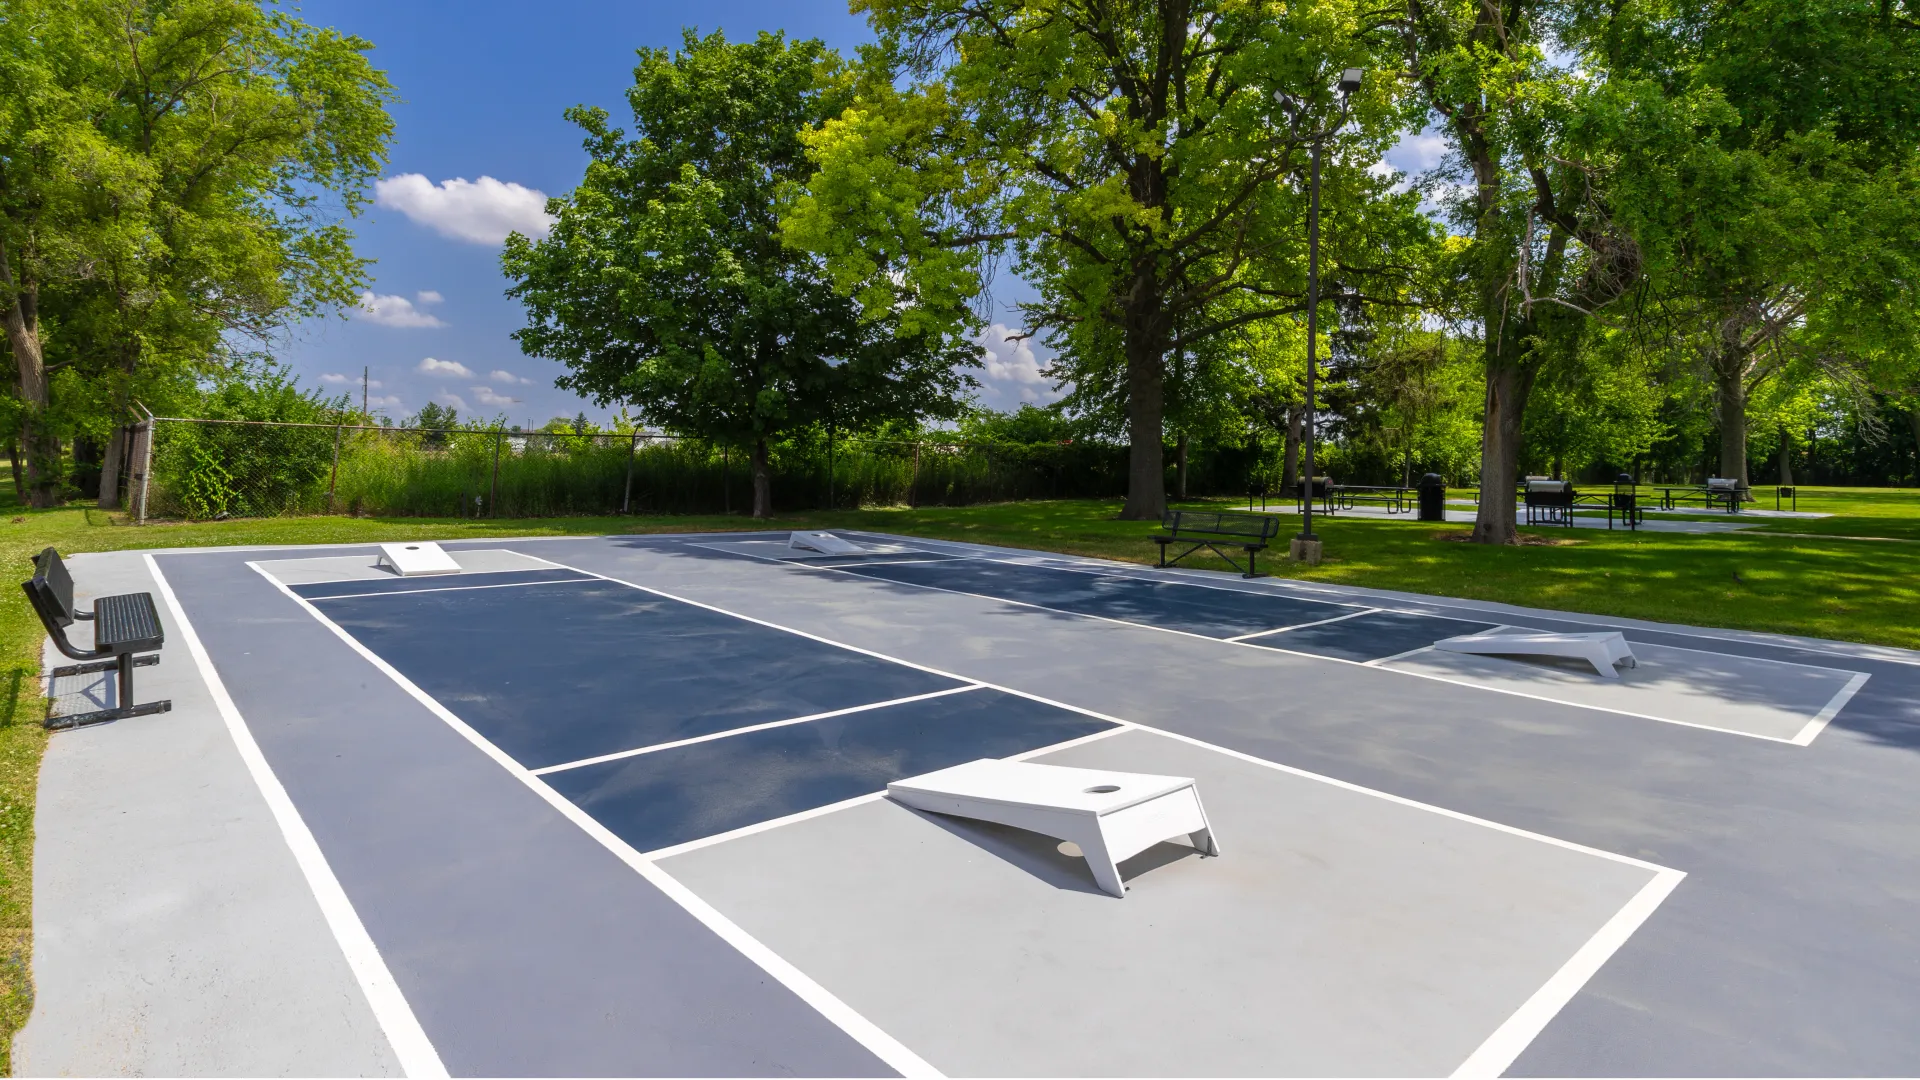 Outdoor cornhole courts at Onyx Apartments, surrounded by lush greenery and equipped with seating areas, offering a space for socializing and outdoor fun.